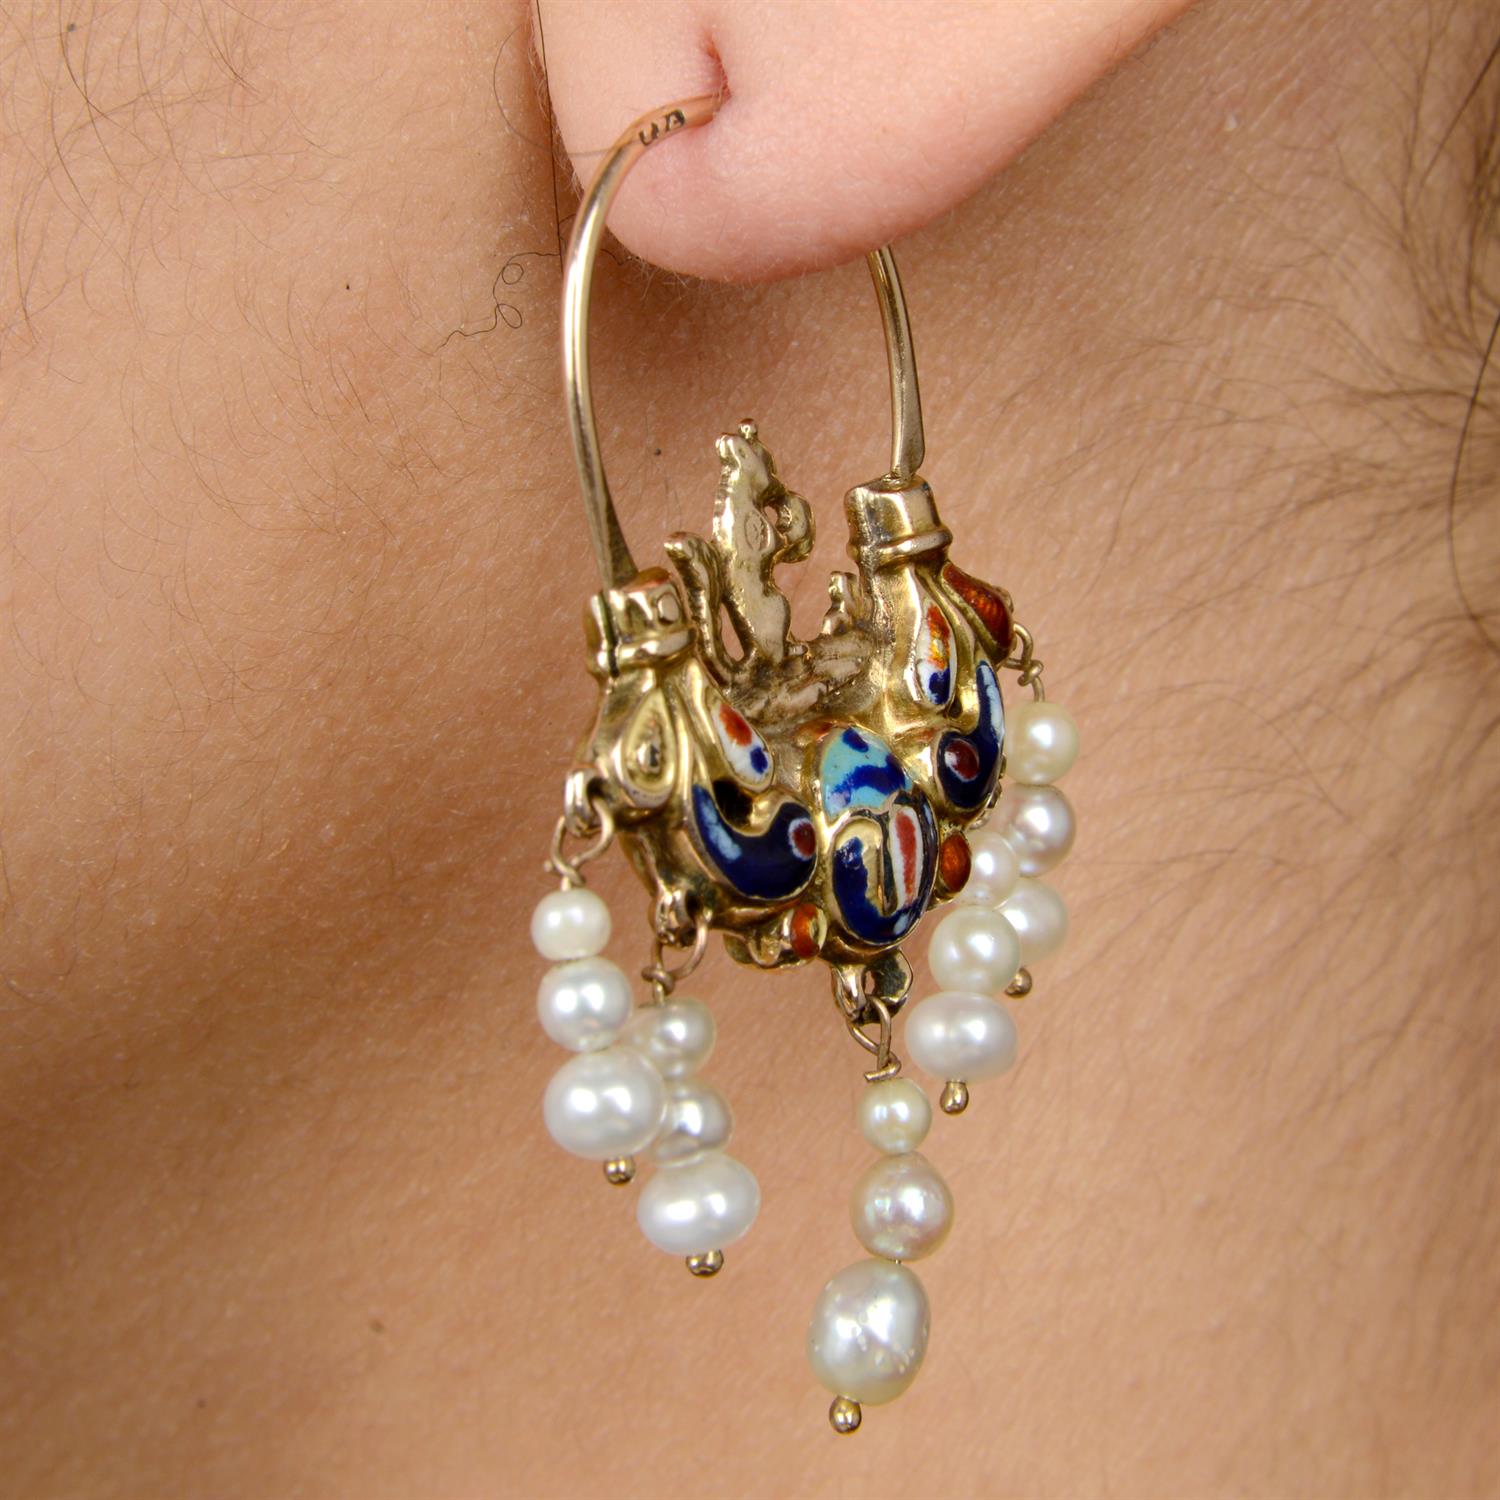 19th century gold enamel and cultured pearl earrings